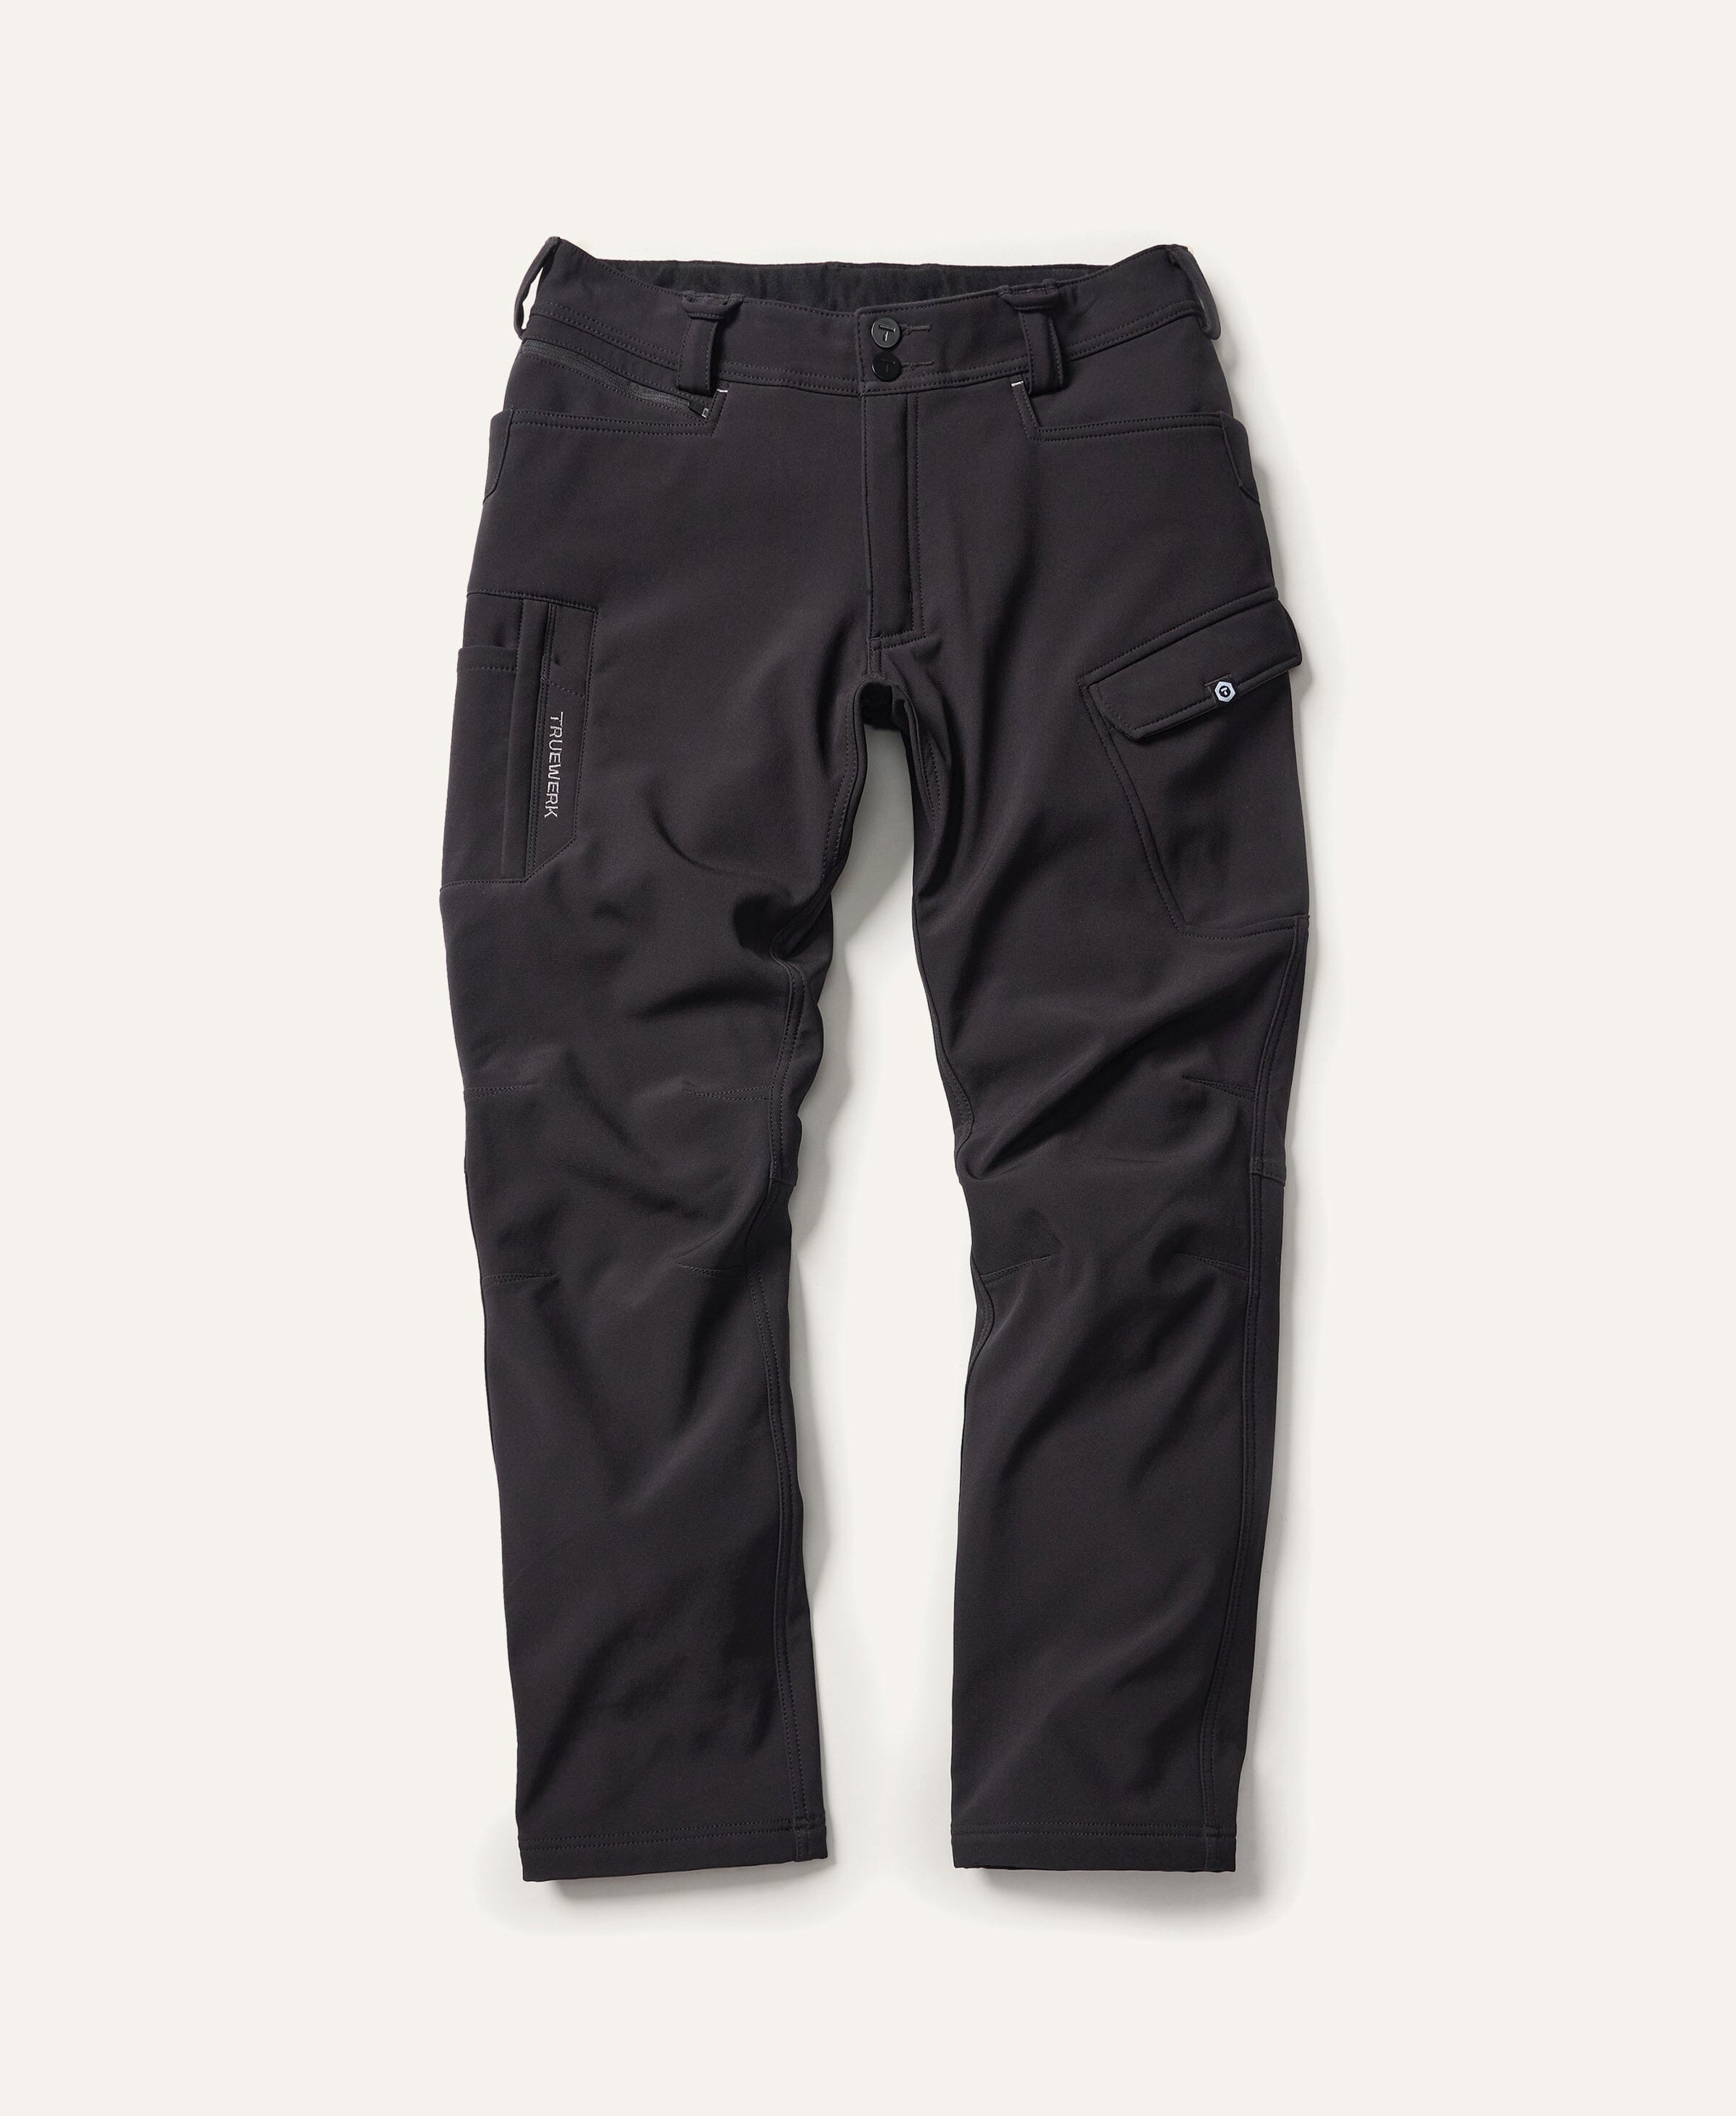 strong 003 trousers black 48